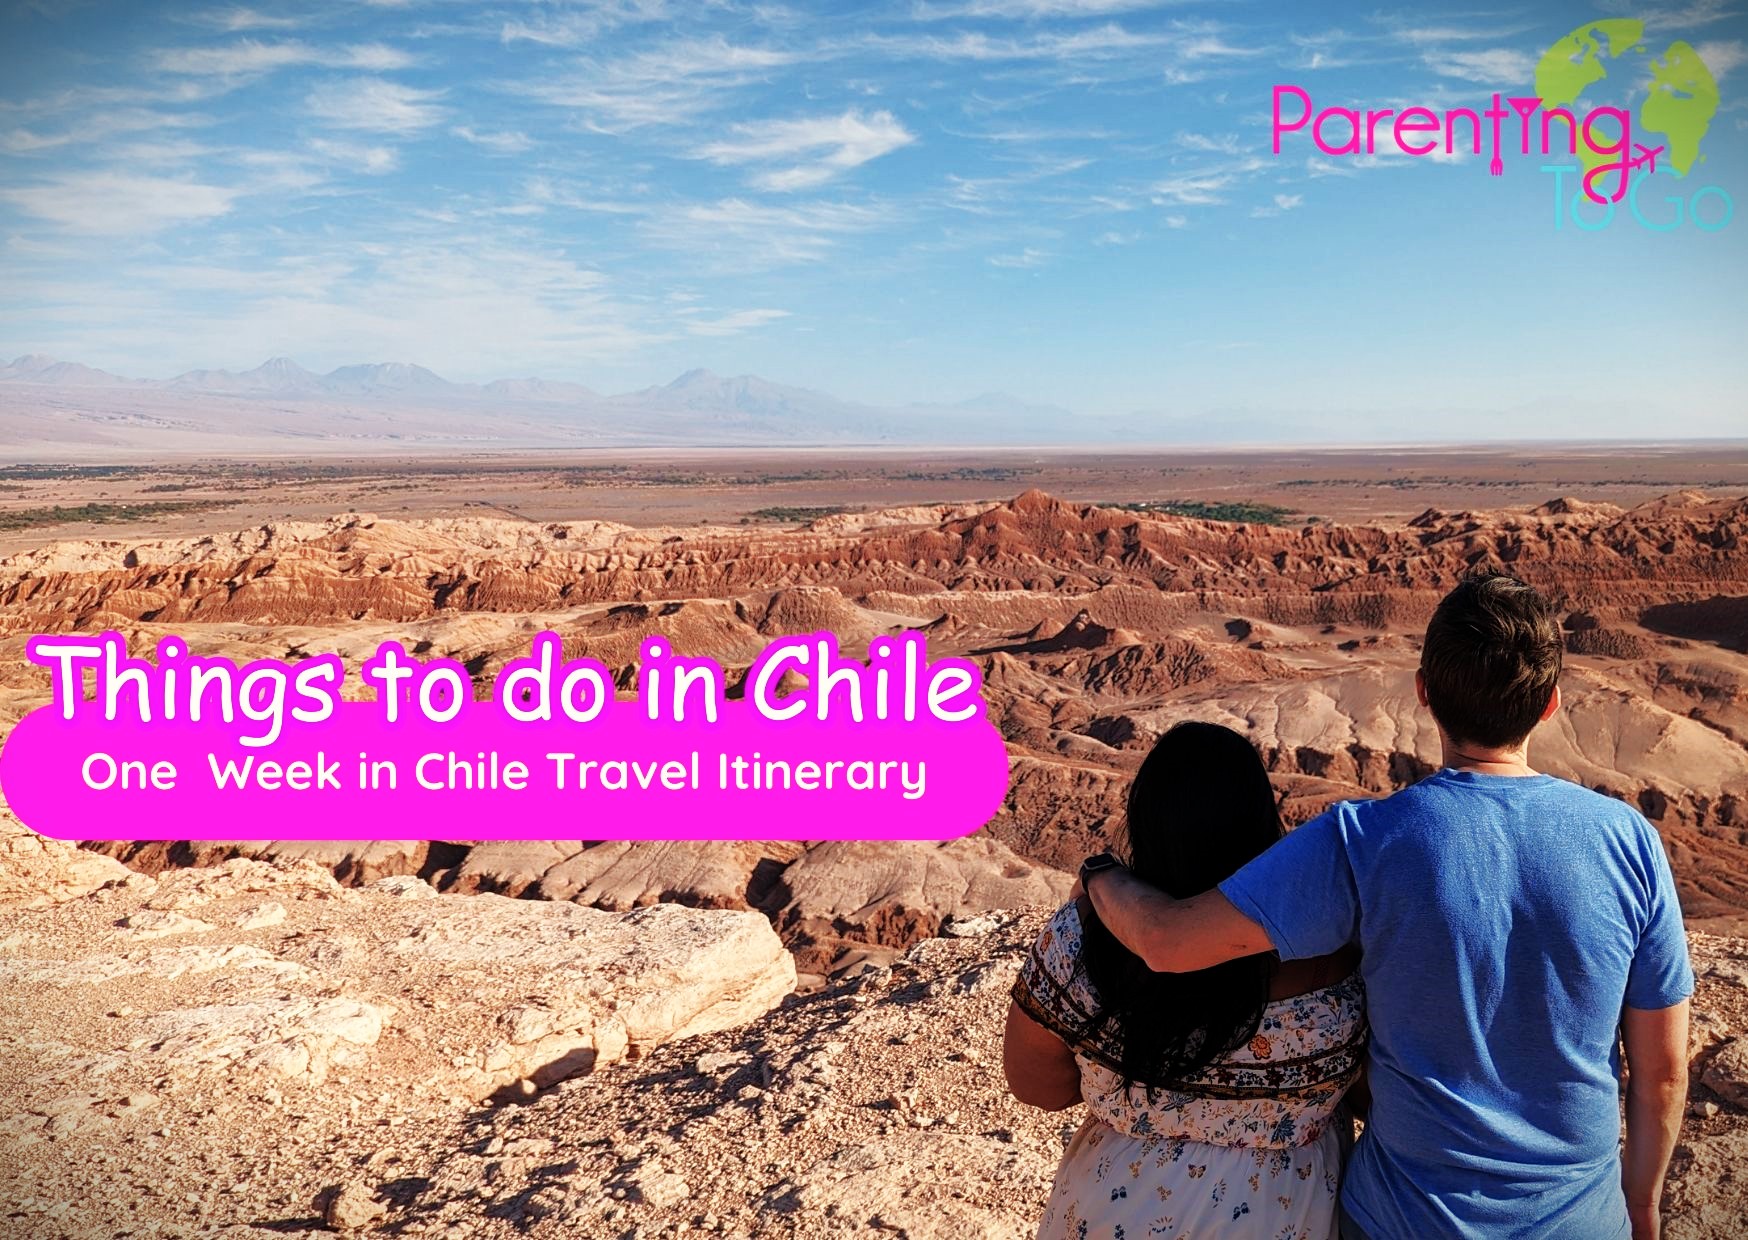 One week in Chile Itinerary